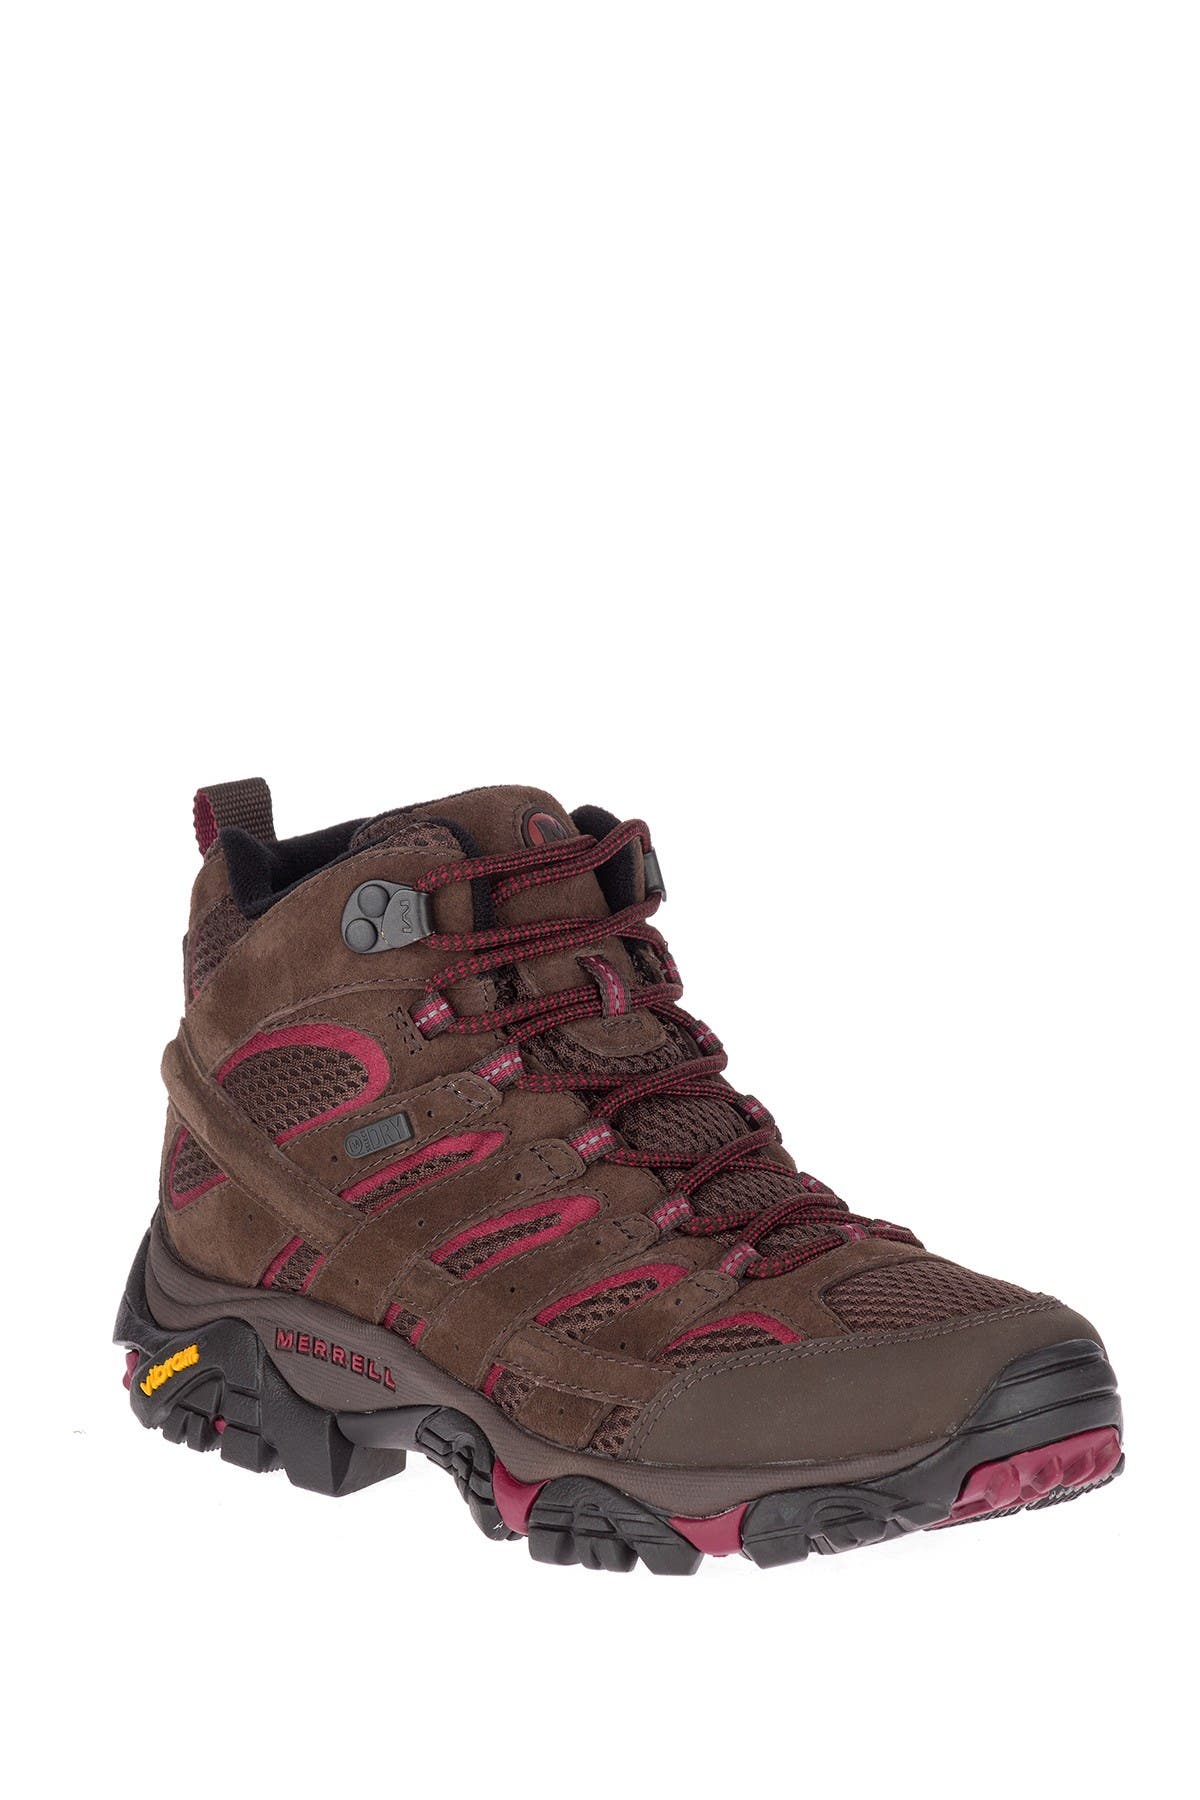 nordstrom merrell womens shoes